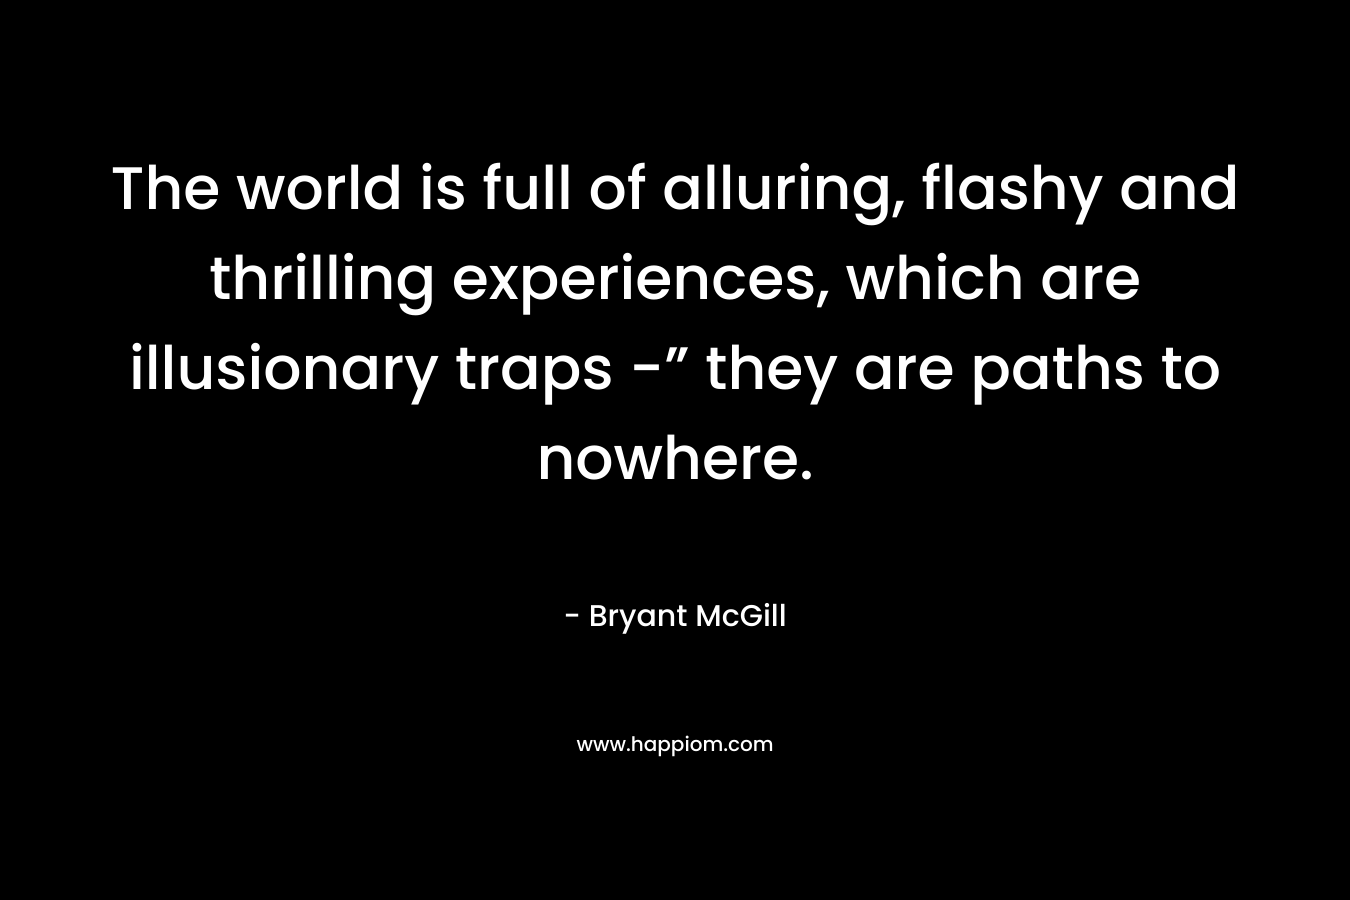 The world is full of alluring, flashy and thrilling experiences, which are illusionary traps -” they are paths to nowhere. – Bryant McGill